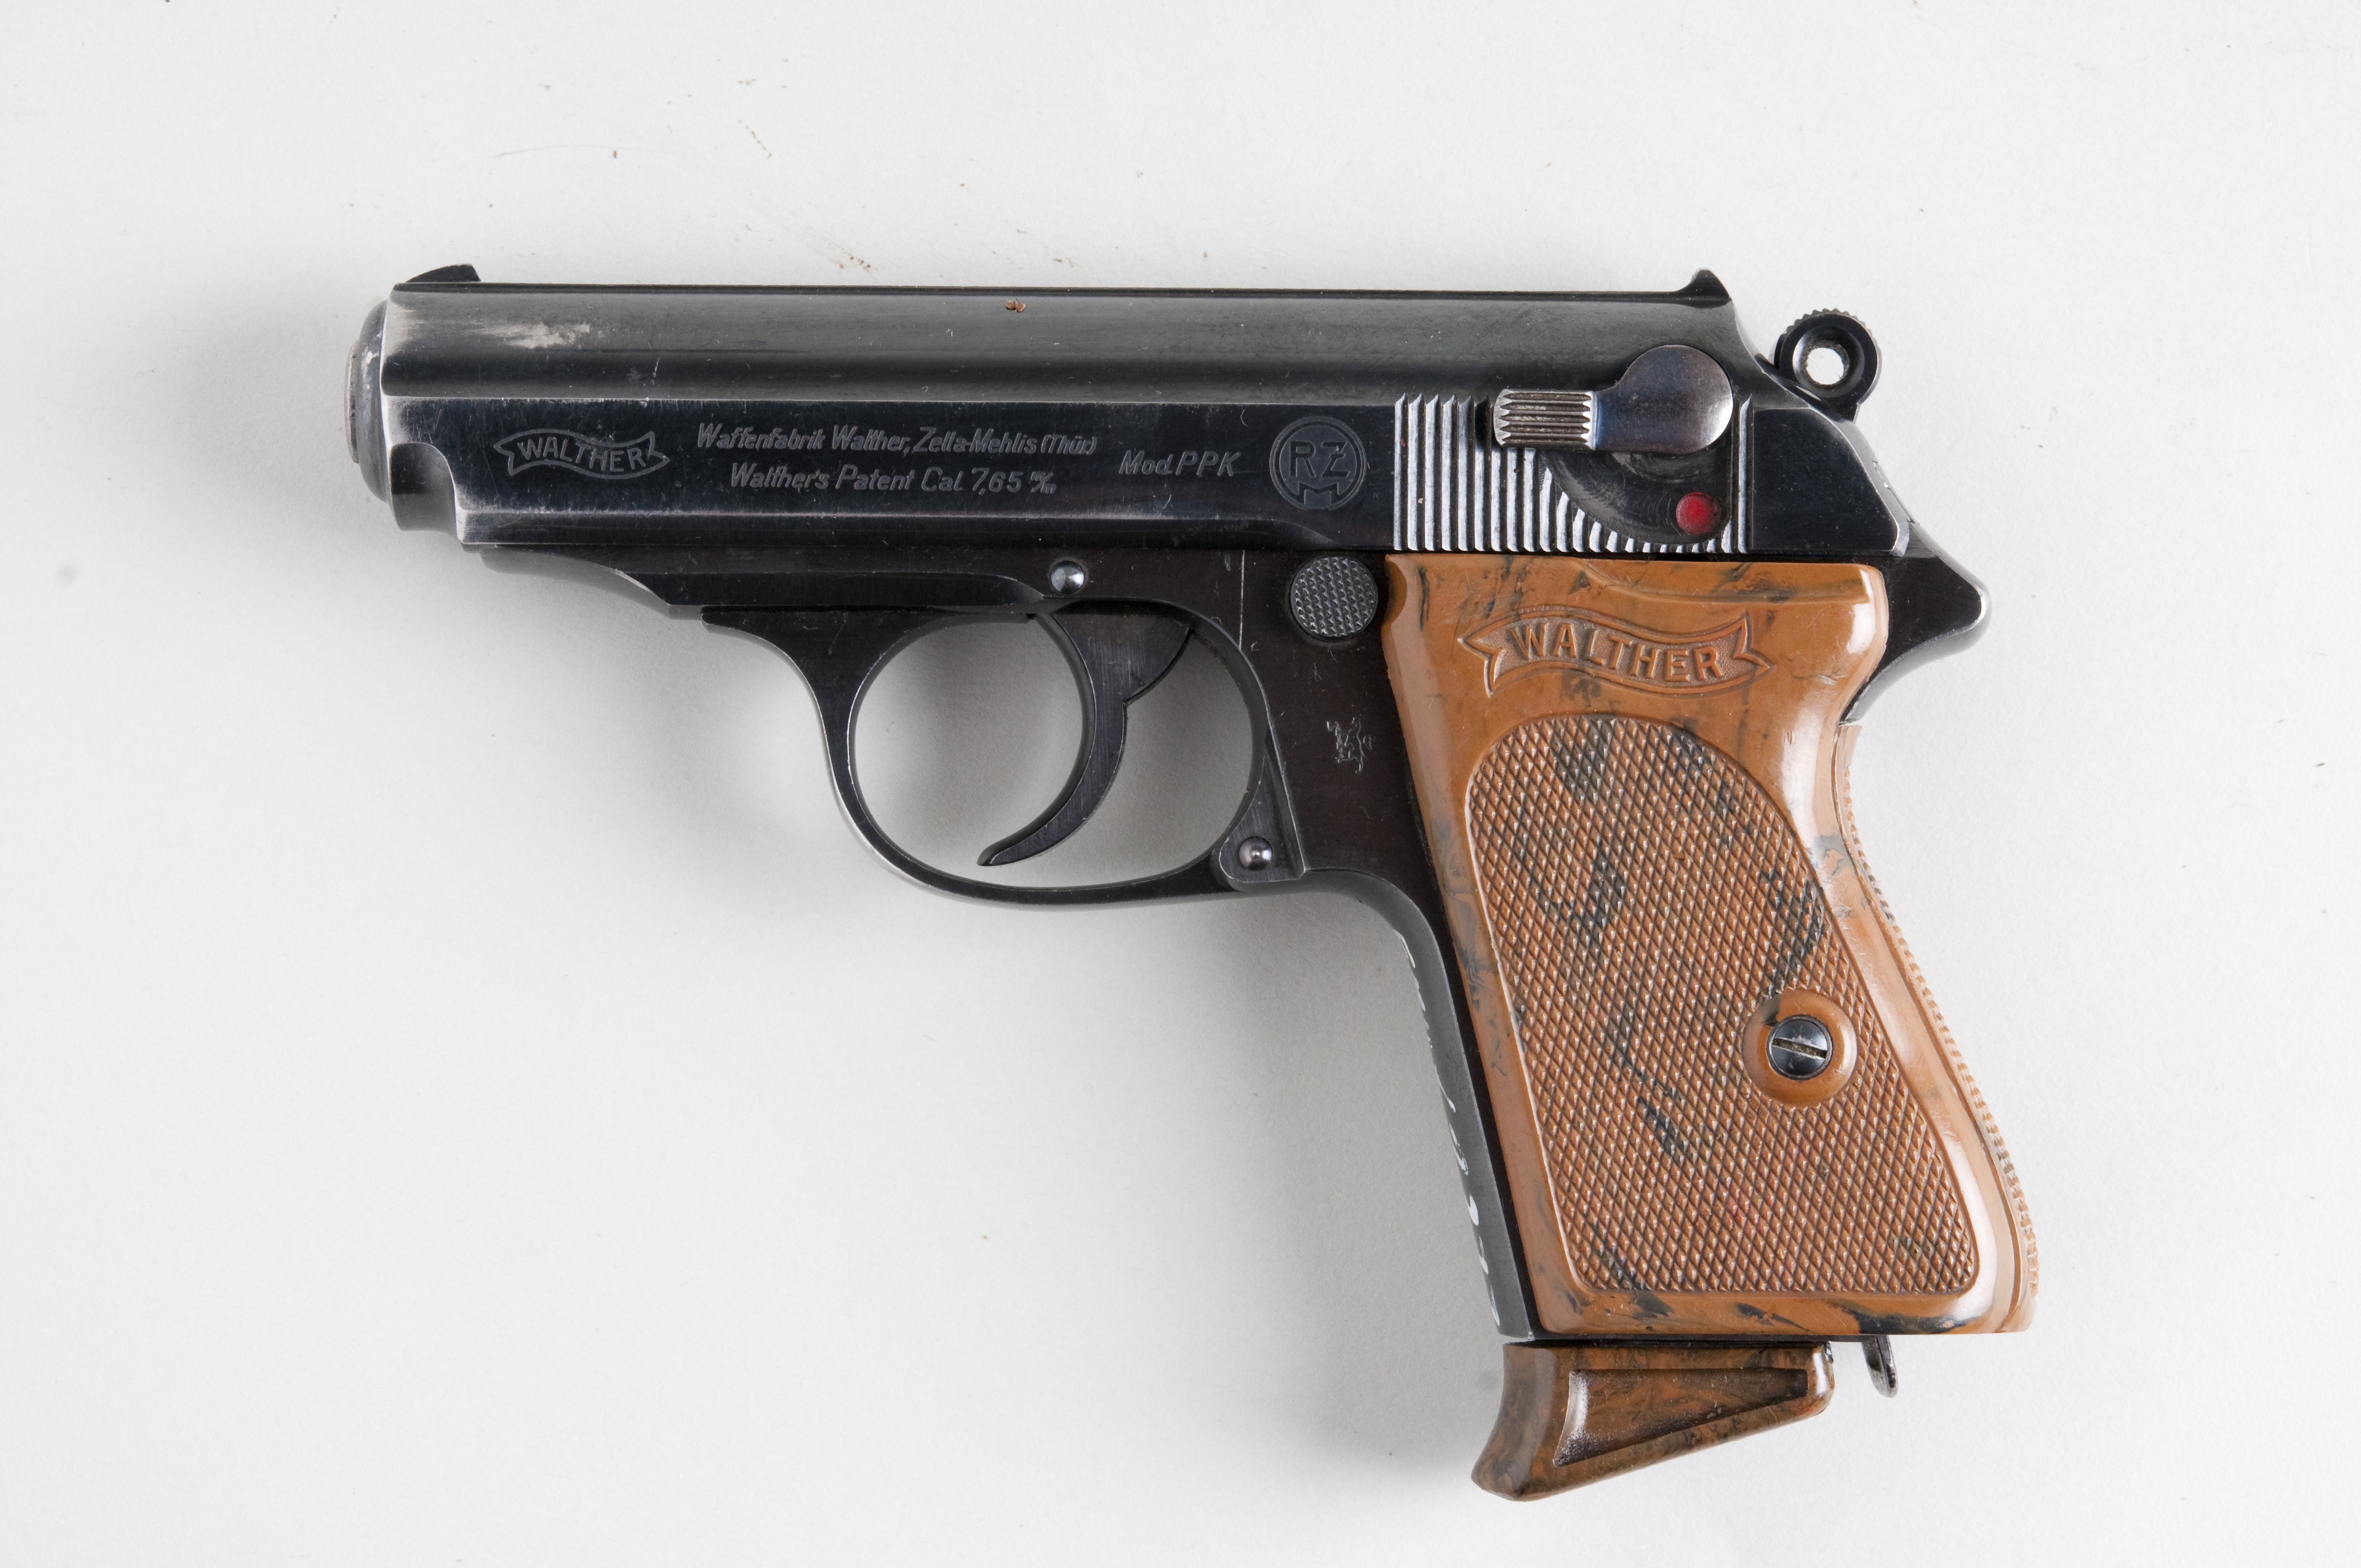 Walther ppk rzm serial numbers